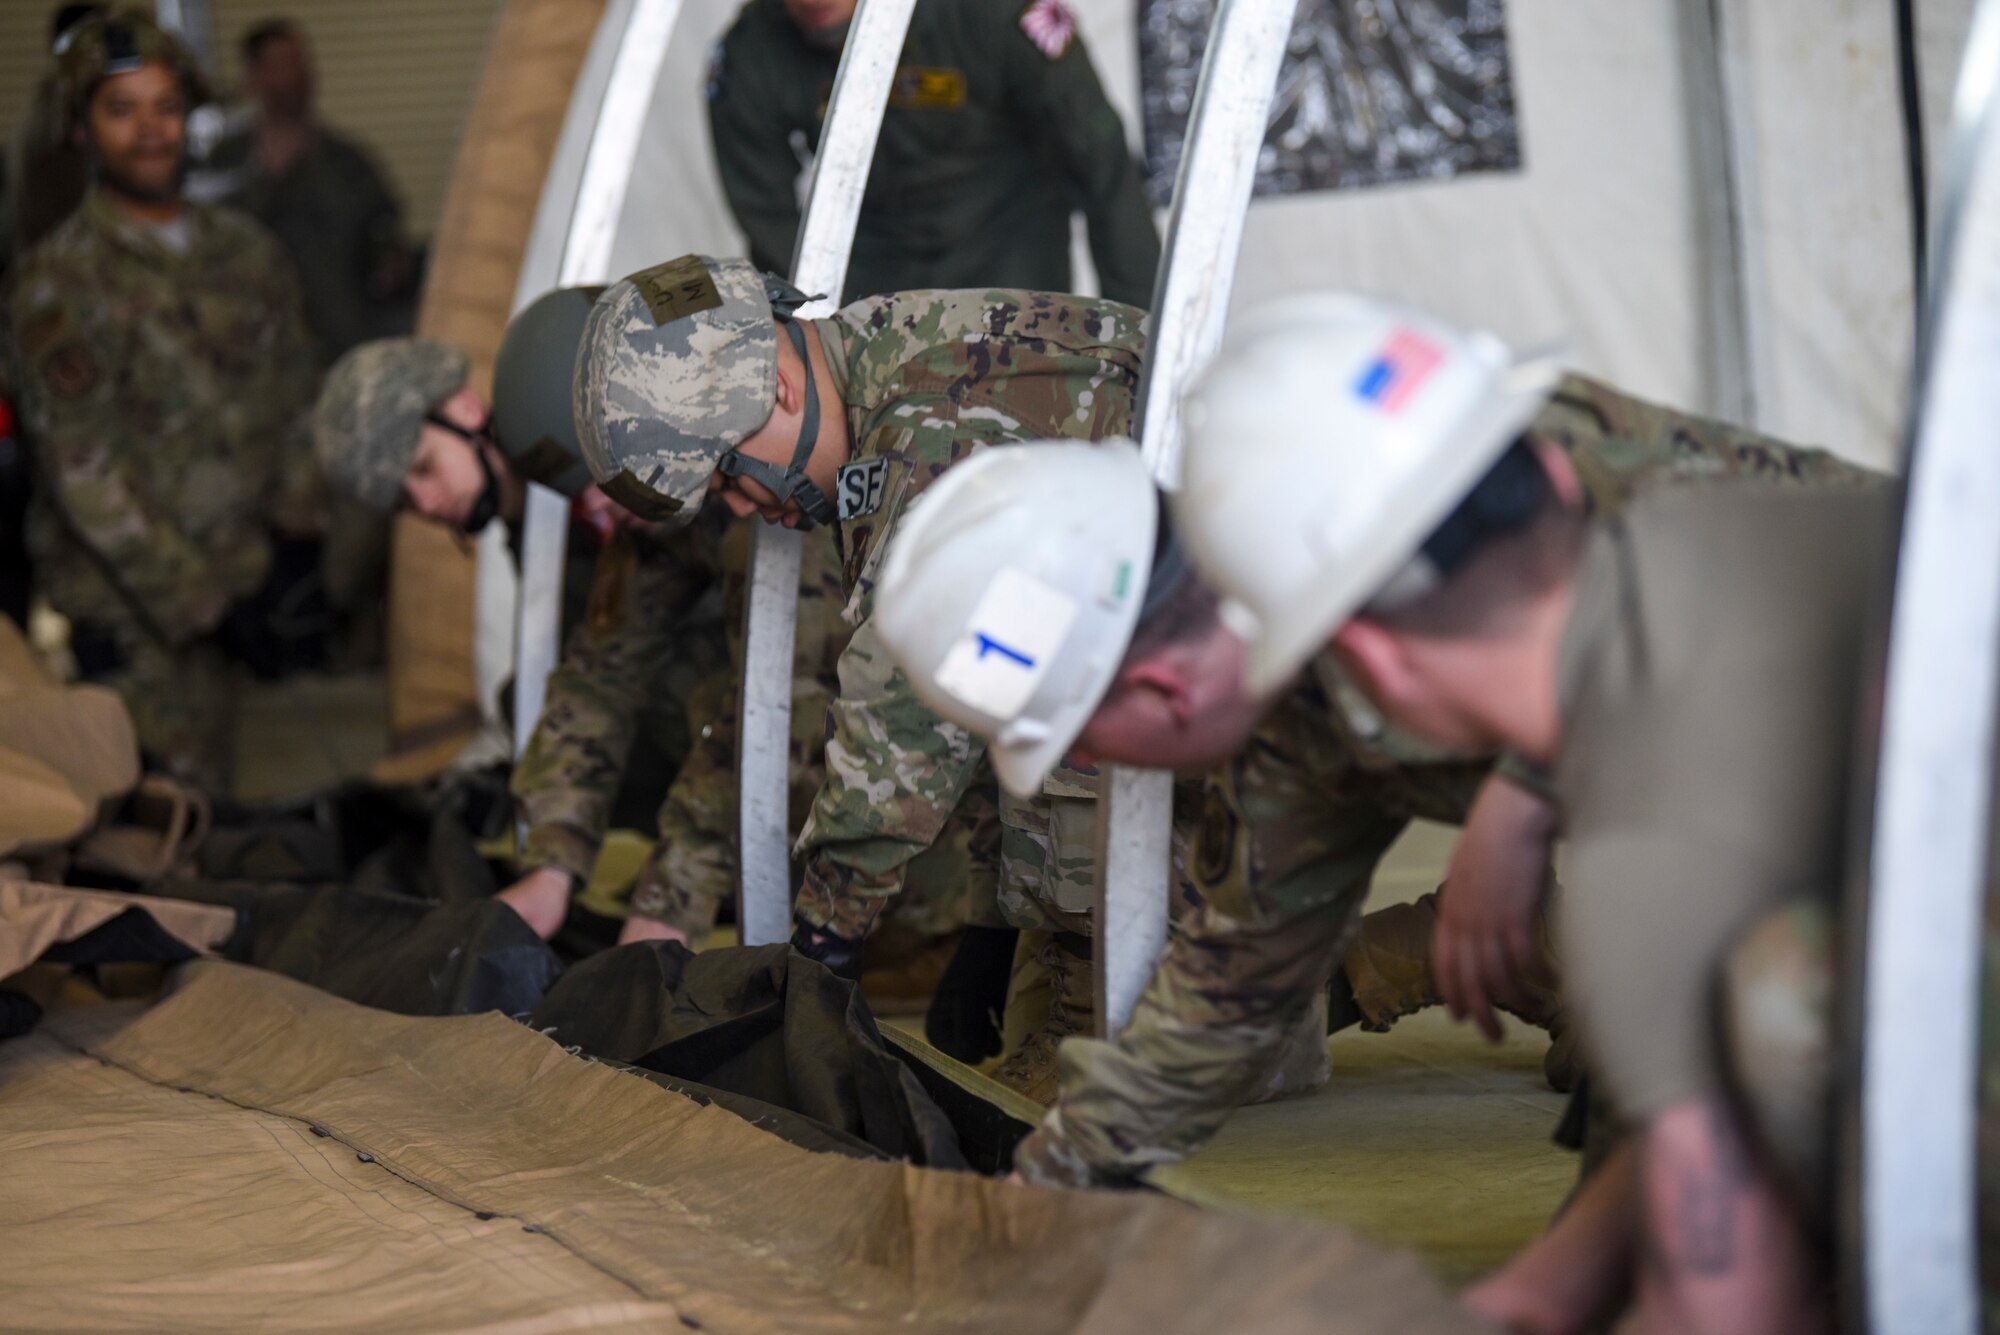 U.S. Airmen from various unit of the 35th Fighter Wing work together to build a small shelter system tent during an Agile Combat Employment practice capstone event at Misawa Air Base, Japan, March 13, 2020. The ACE concept requires units to deploy small teams to austere locations. As such, Airmen are training to be able to assist in completing tasks outside of their normal career functions. (U.S. Air Force photo by Tech. Sgt. Timothy Moore)